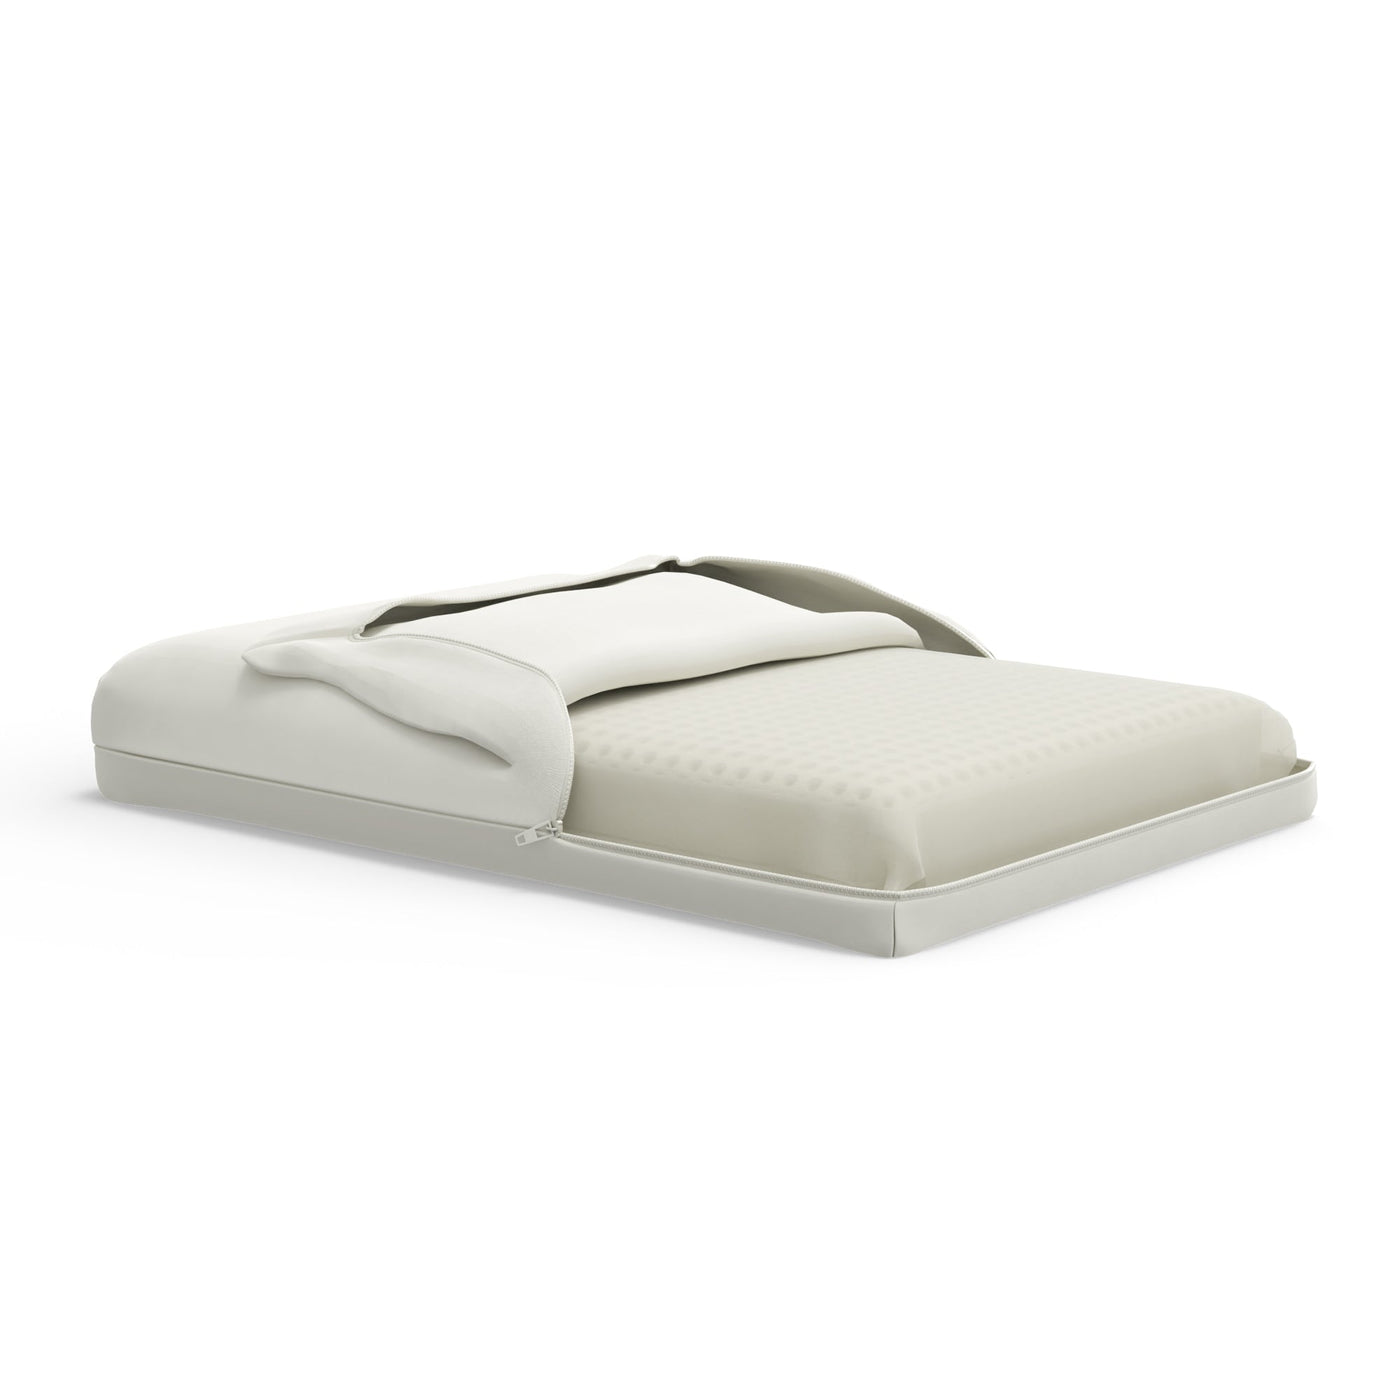 Low Profile Stomach and Back Sleeper Pillow - mysleepscience.com